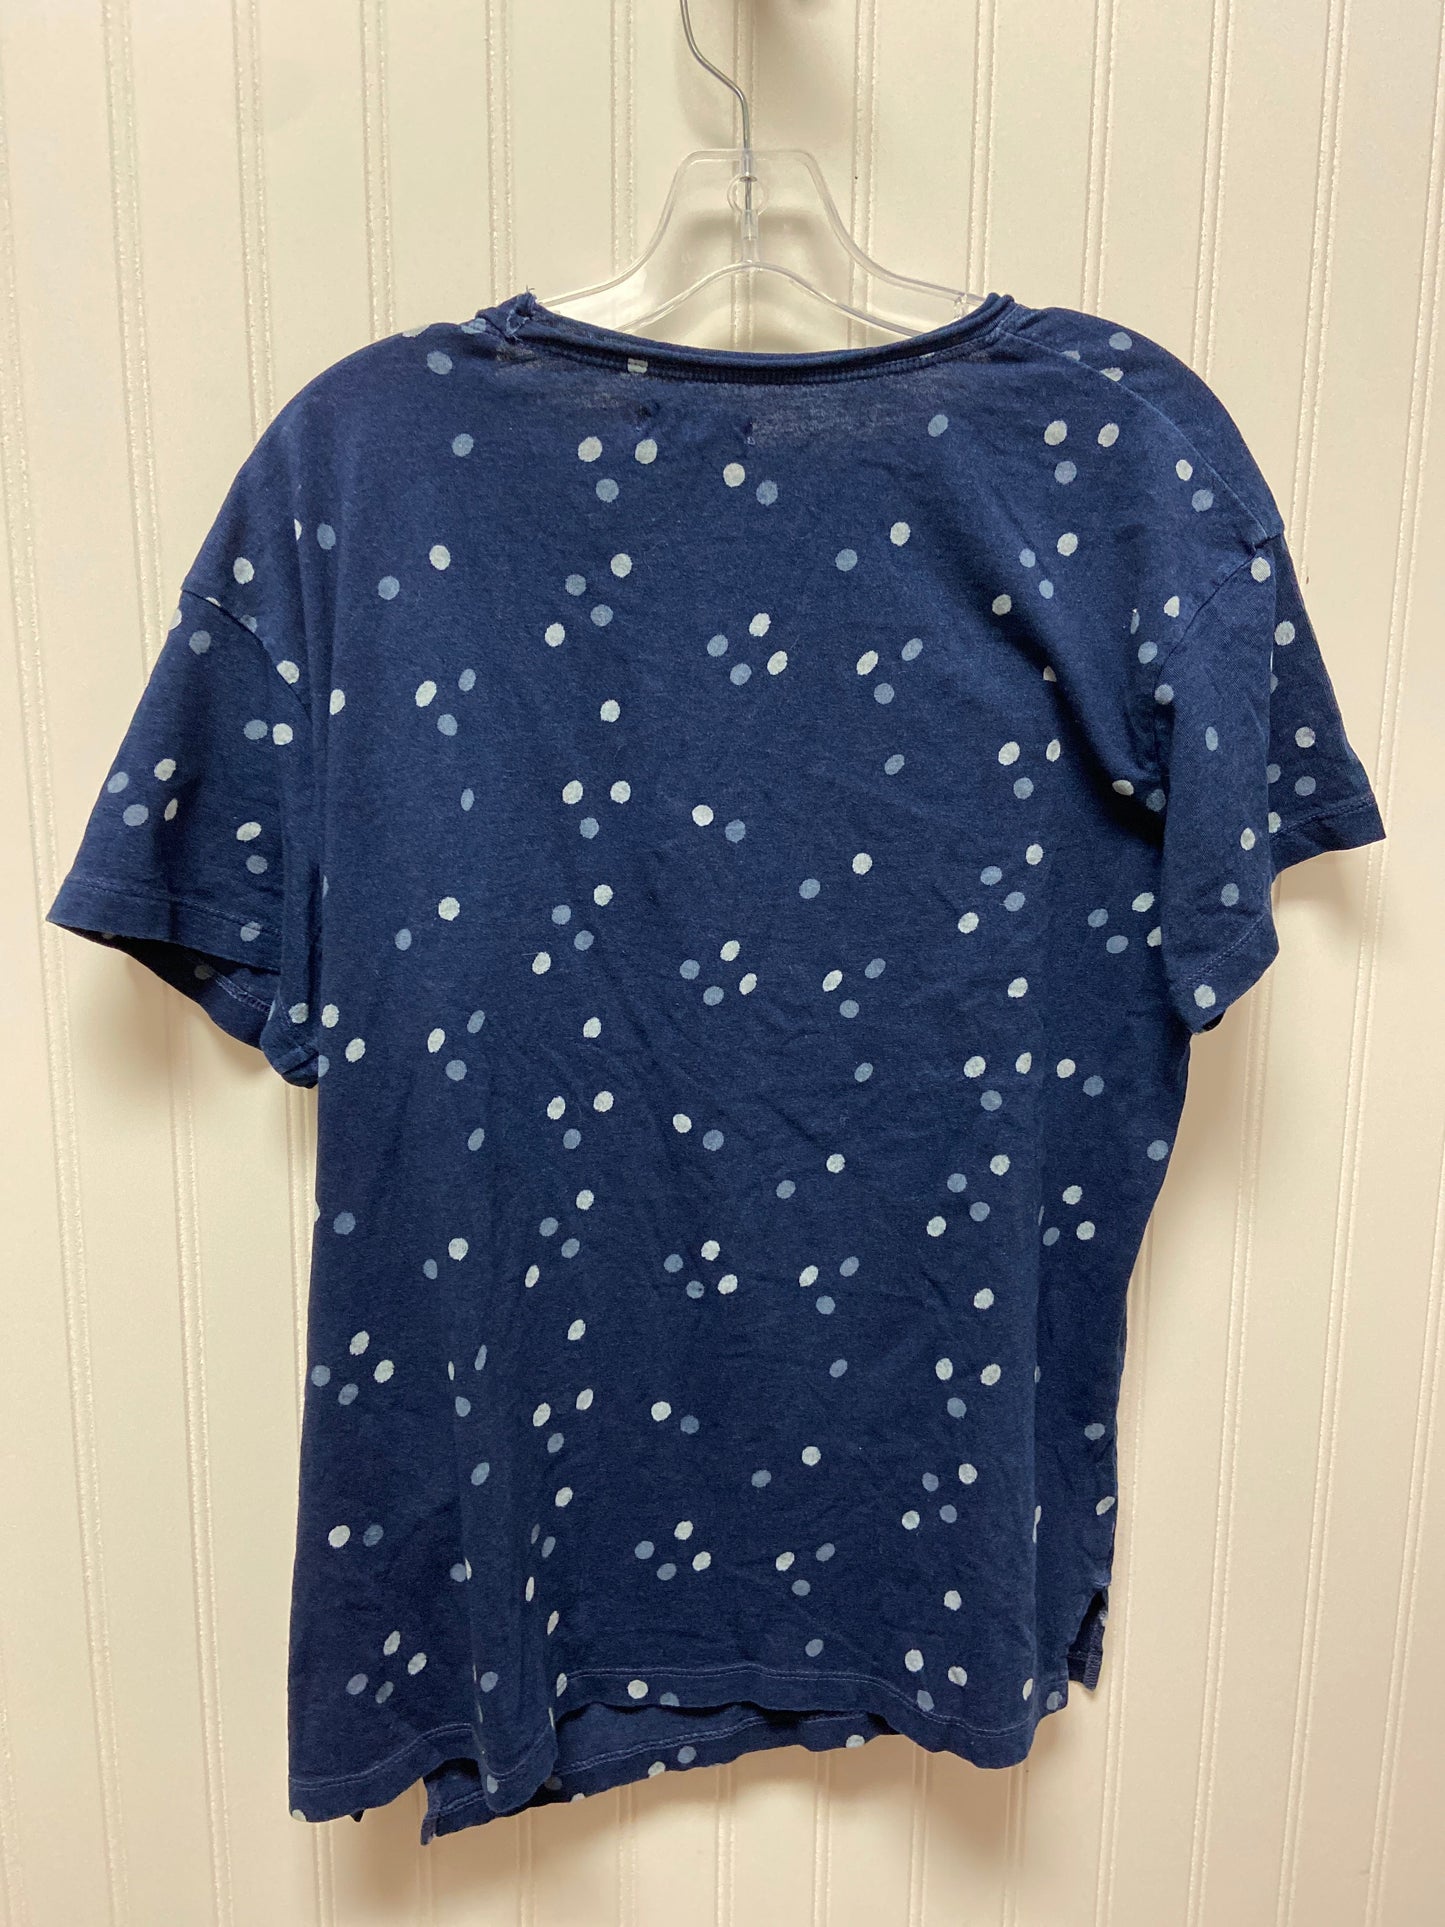 Navy Top Short Sleeve Madewell, Size L